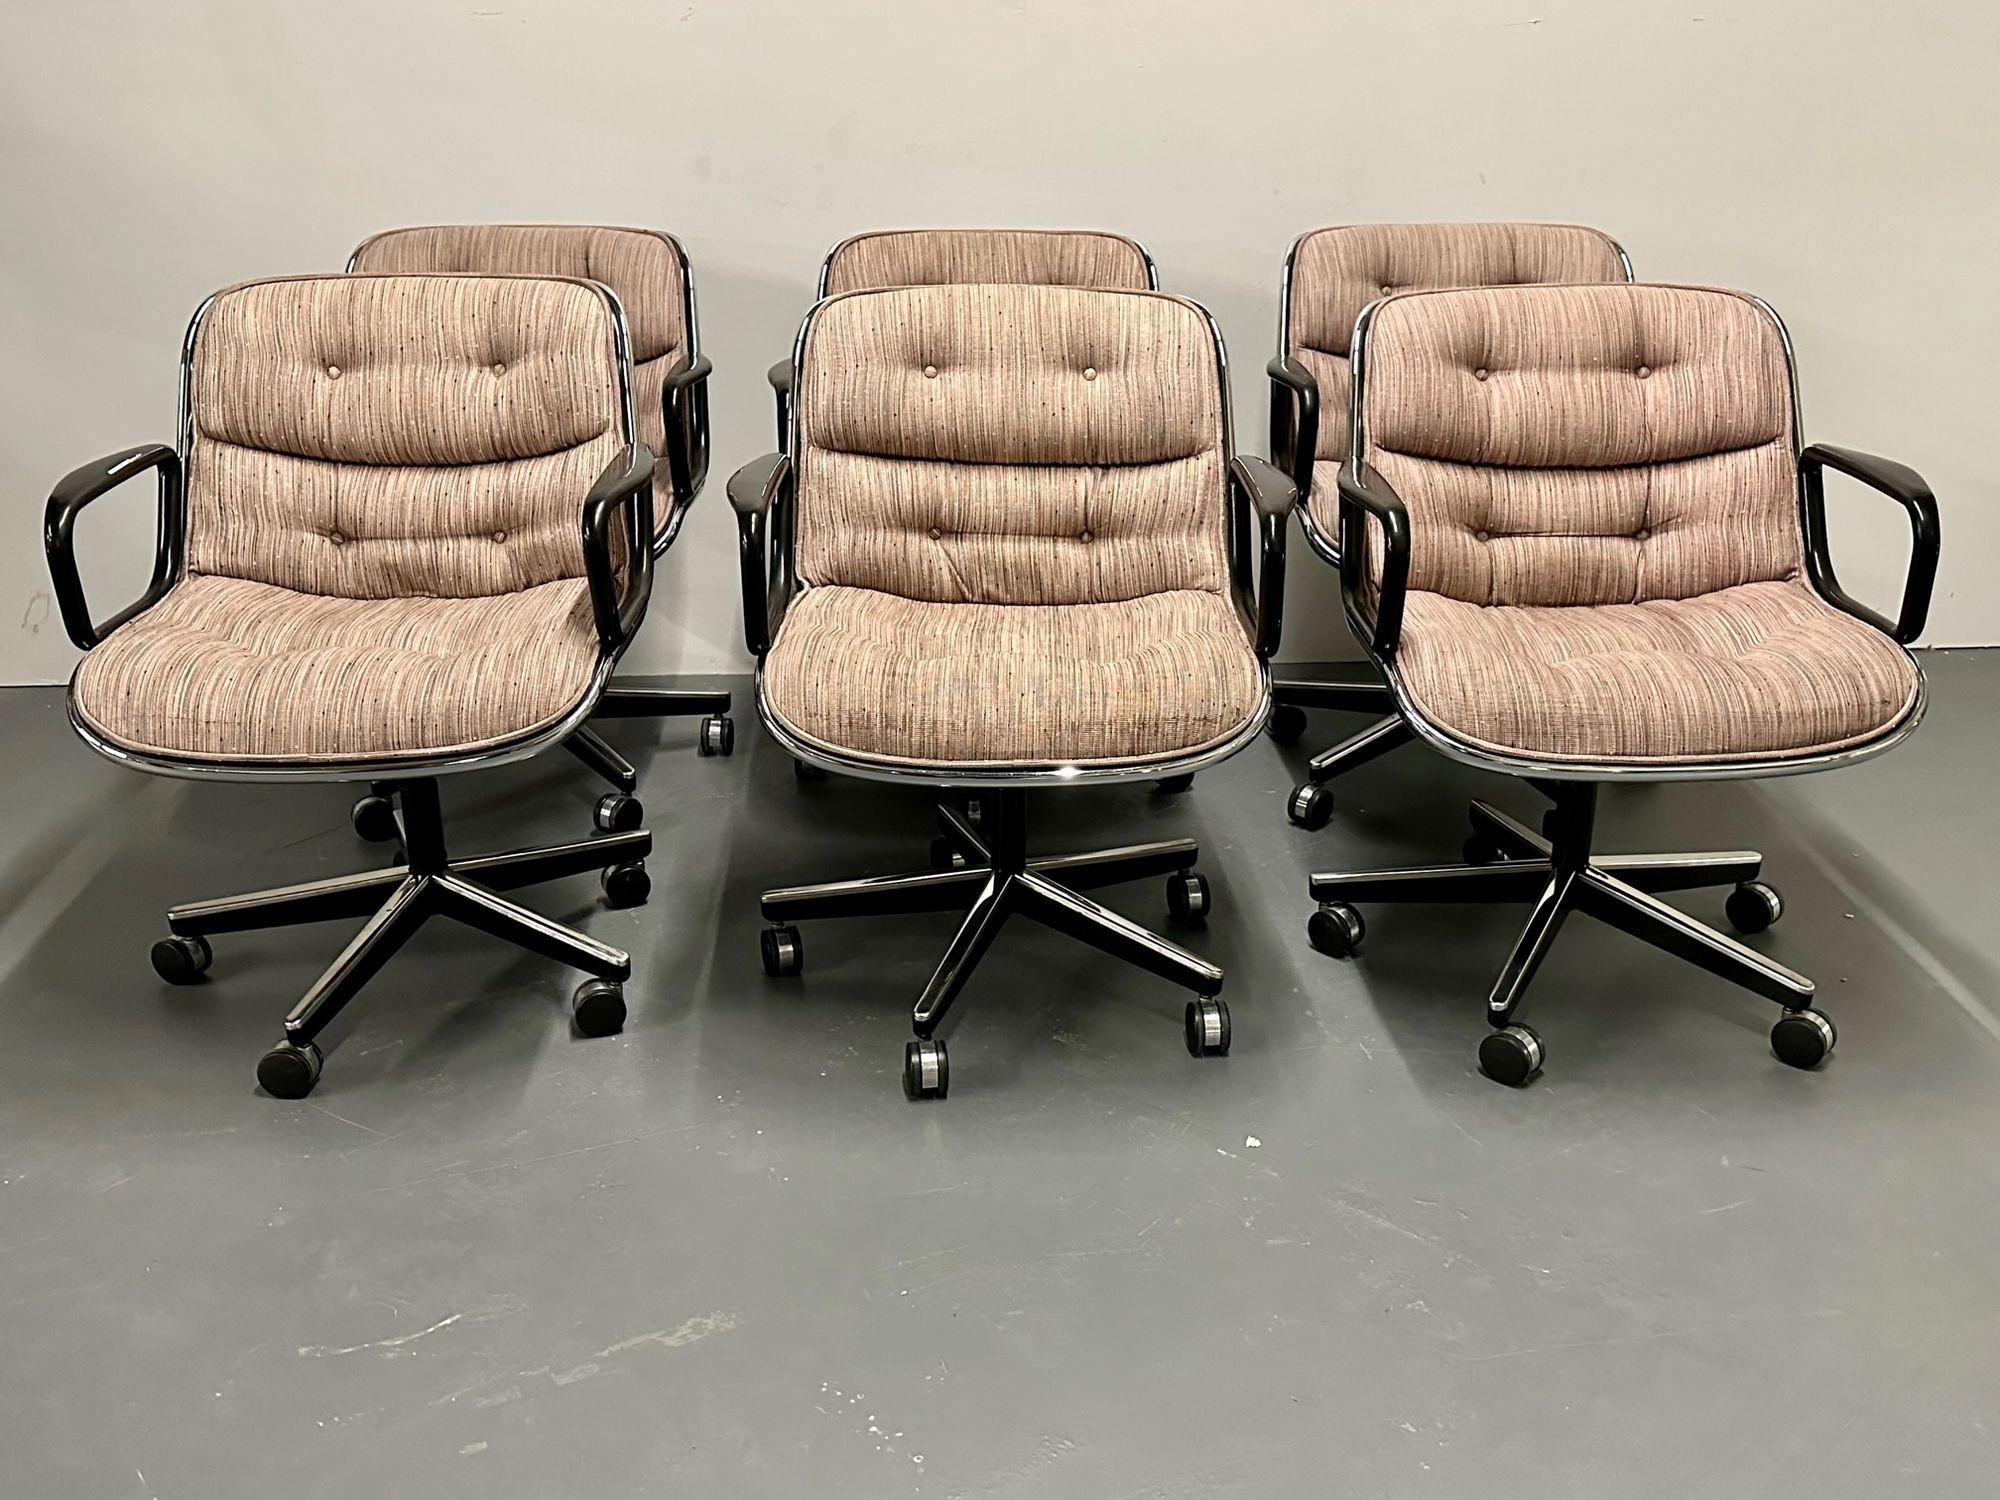 Vintage set of six charles pollock for knoll rolling office / desk chairs, 1985.
 
Six rolling 'Executive Desk' or office chairs by Charles Pollock for Knoll. Chairs maintain their original KNOLL manufacturer label from 1985. Later